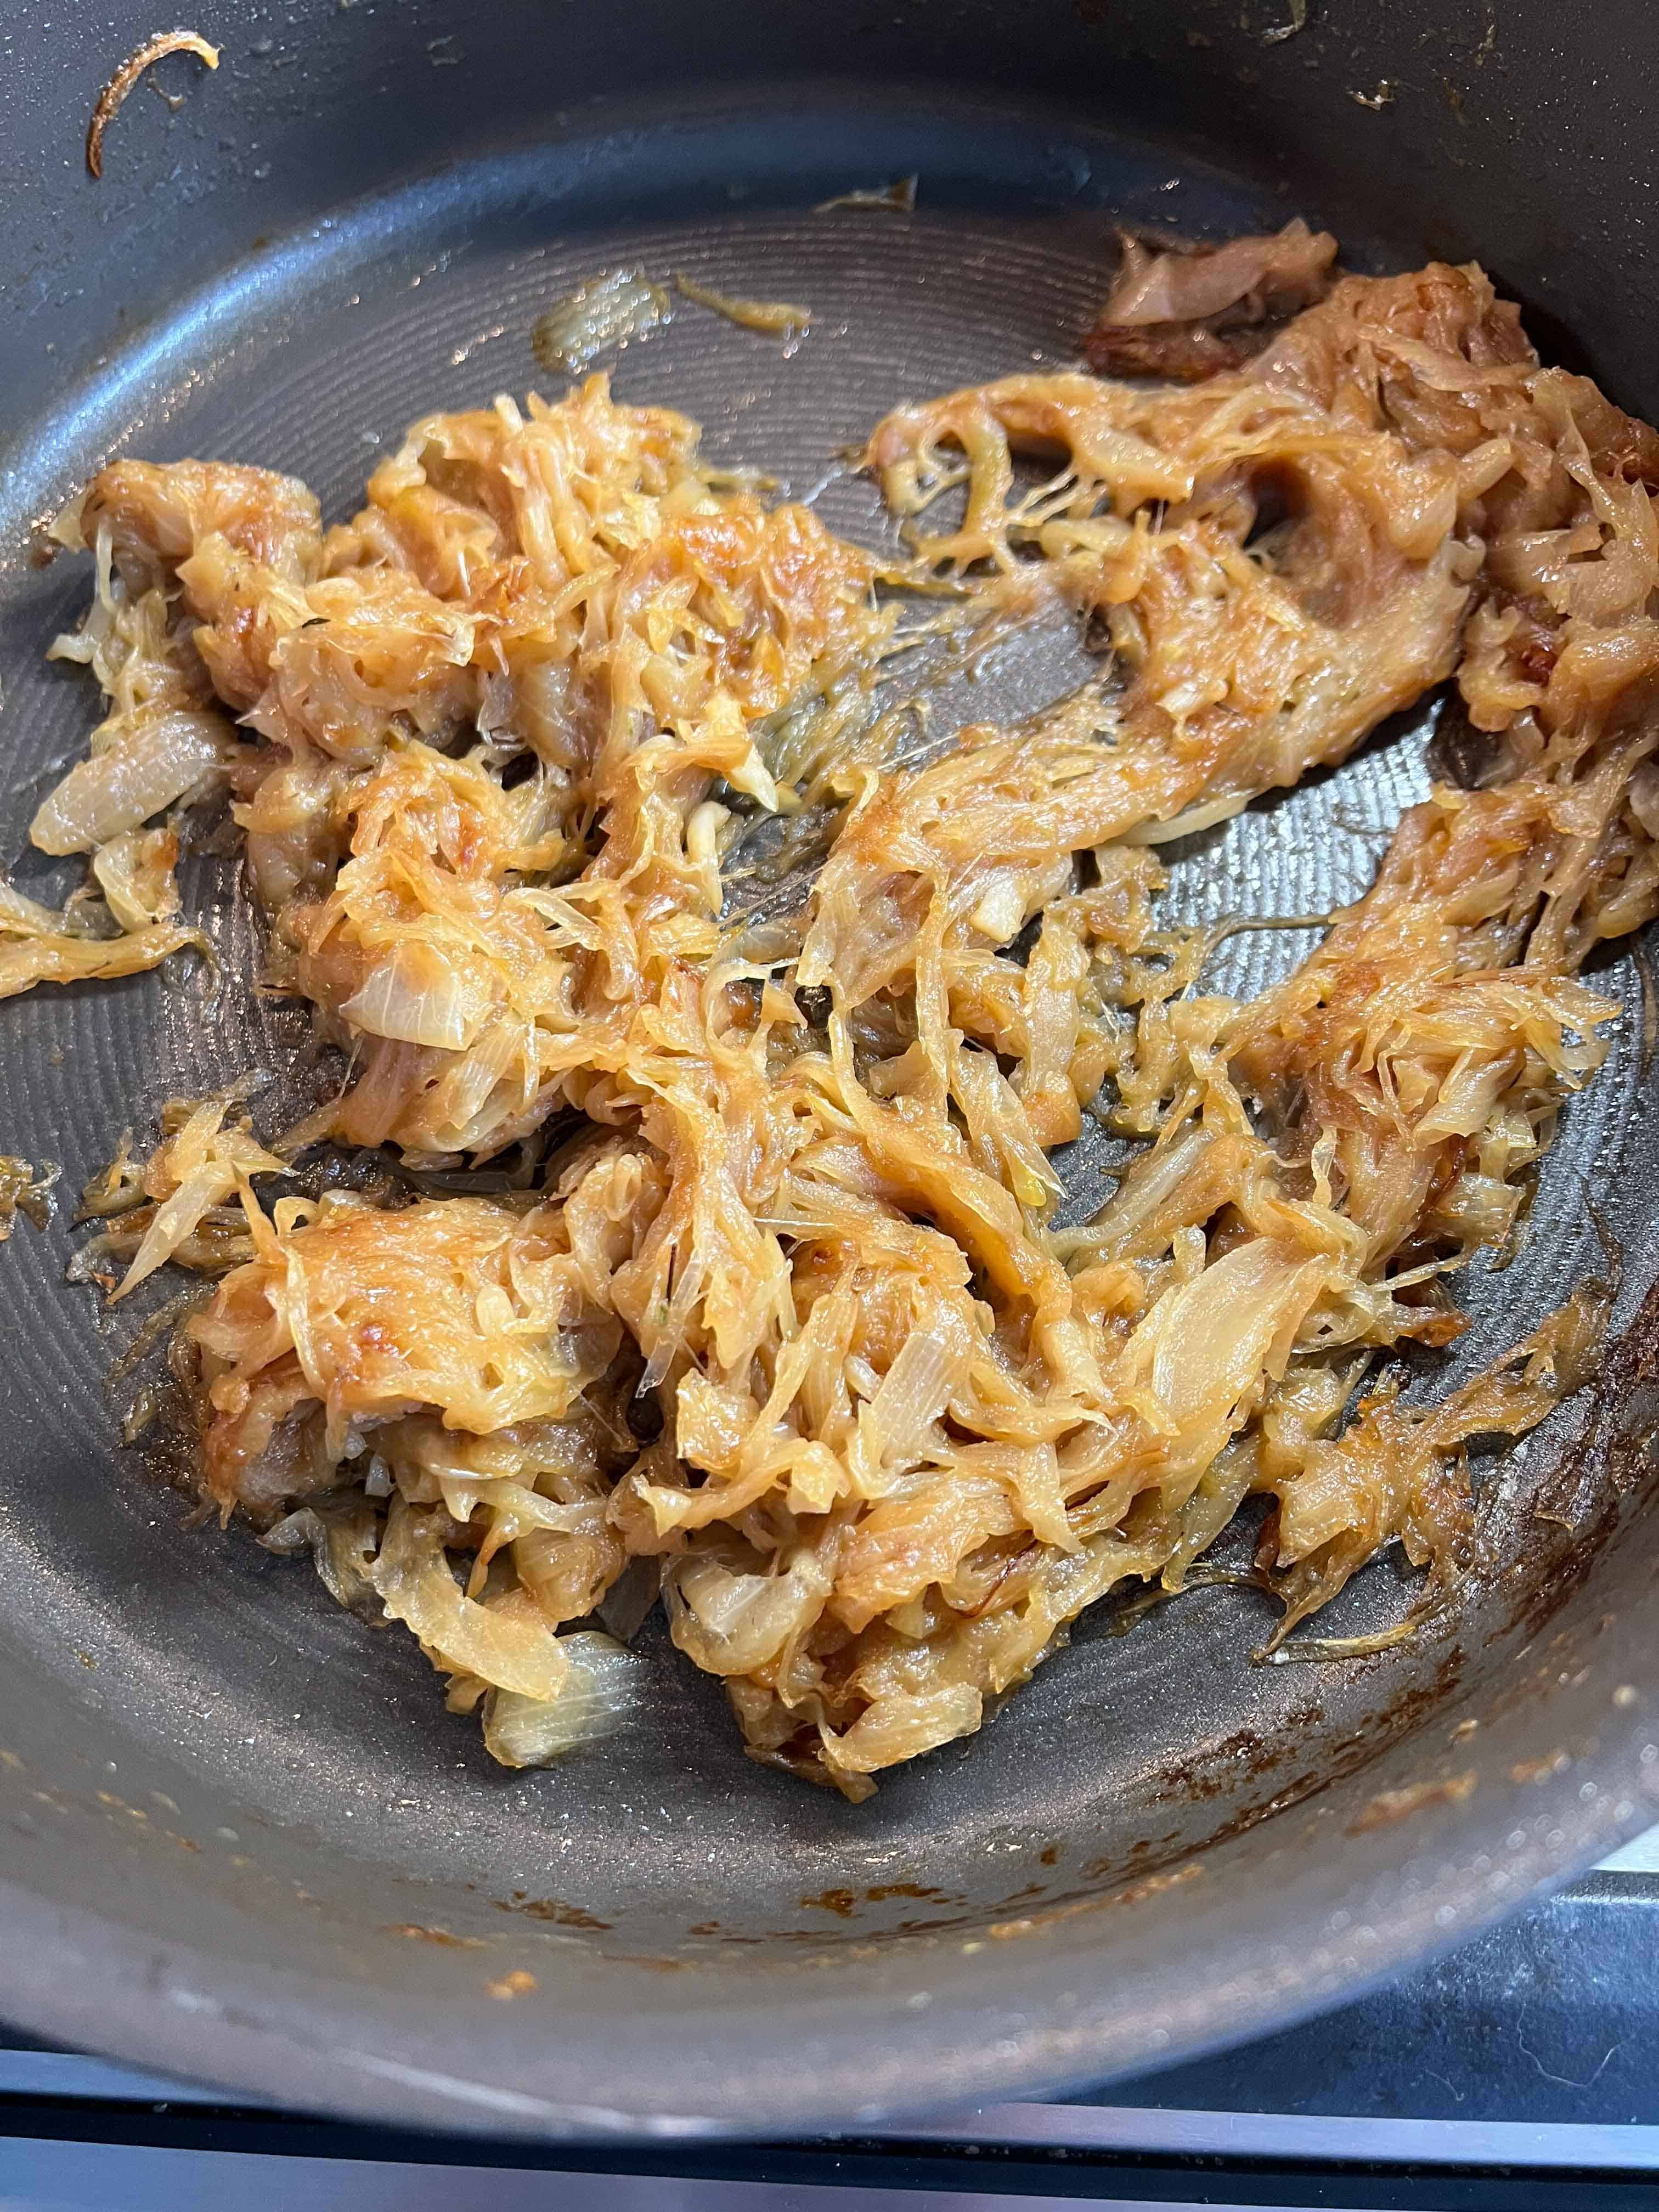 Caramelized onions after 45 minutes